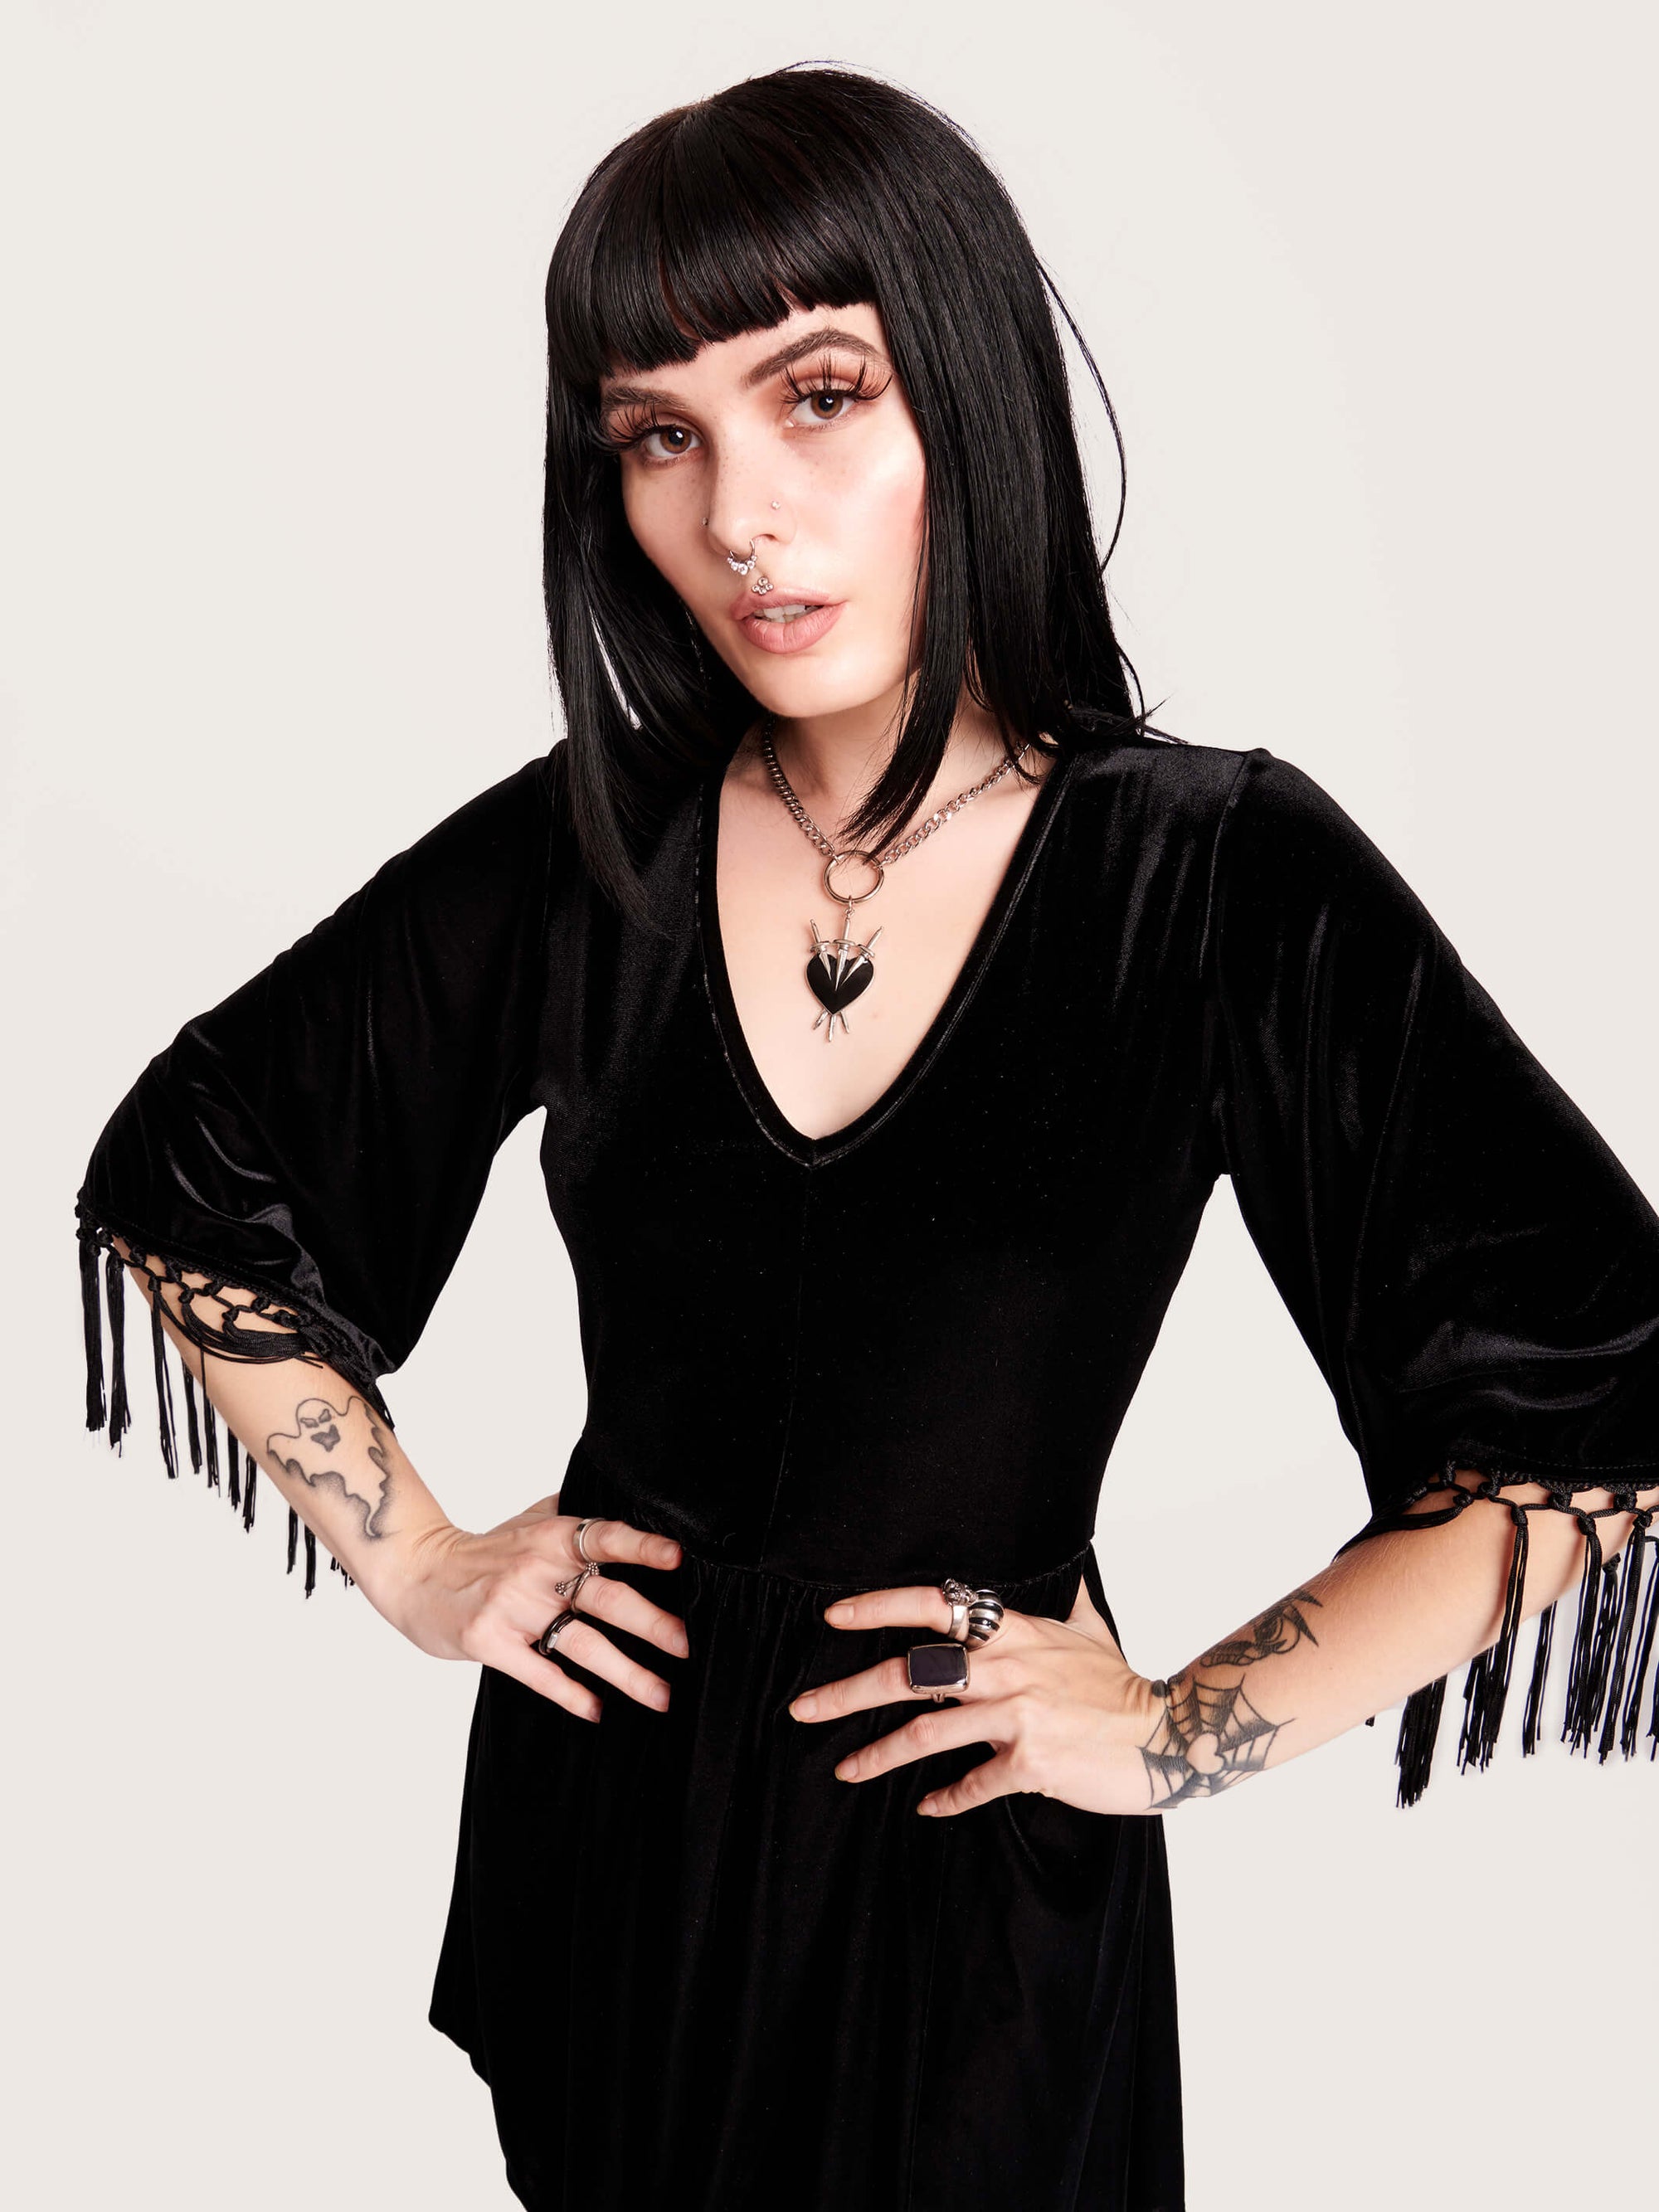 Good witch or bad witch? Day or evening? You decide when you wear our stretch velvet dress with fringe details on the sleeves. Stretch elastic at waist.  Goth grunge fashion, alt girl fashion, goth clothing, gothic dress, black velvet dress, egirl fashion, emo fashion